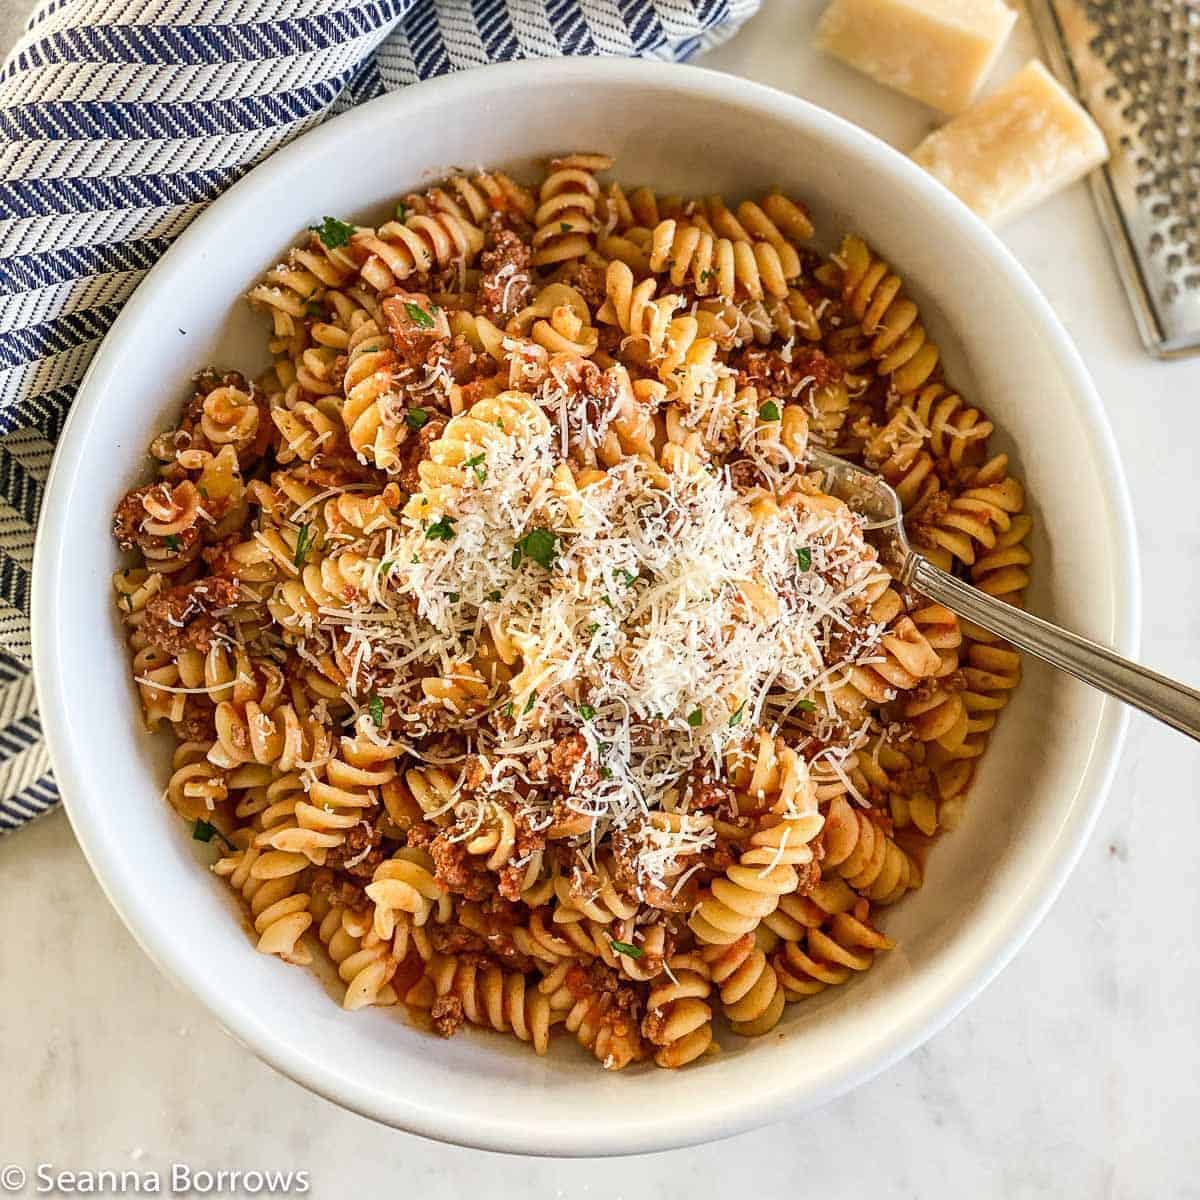 Delicious ground bison pasta in a white bowl with a fork.